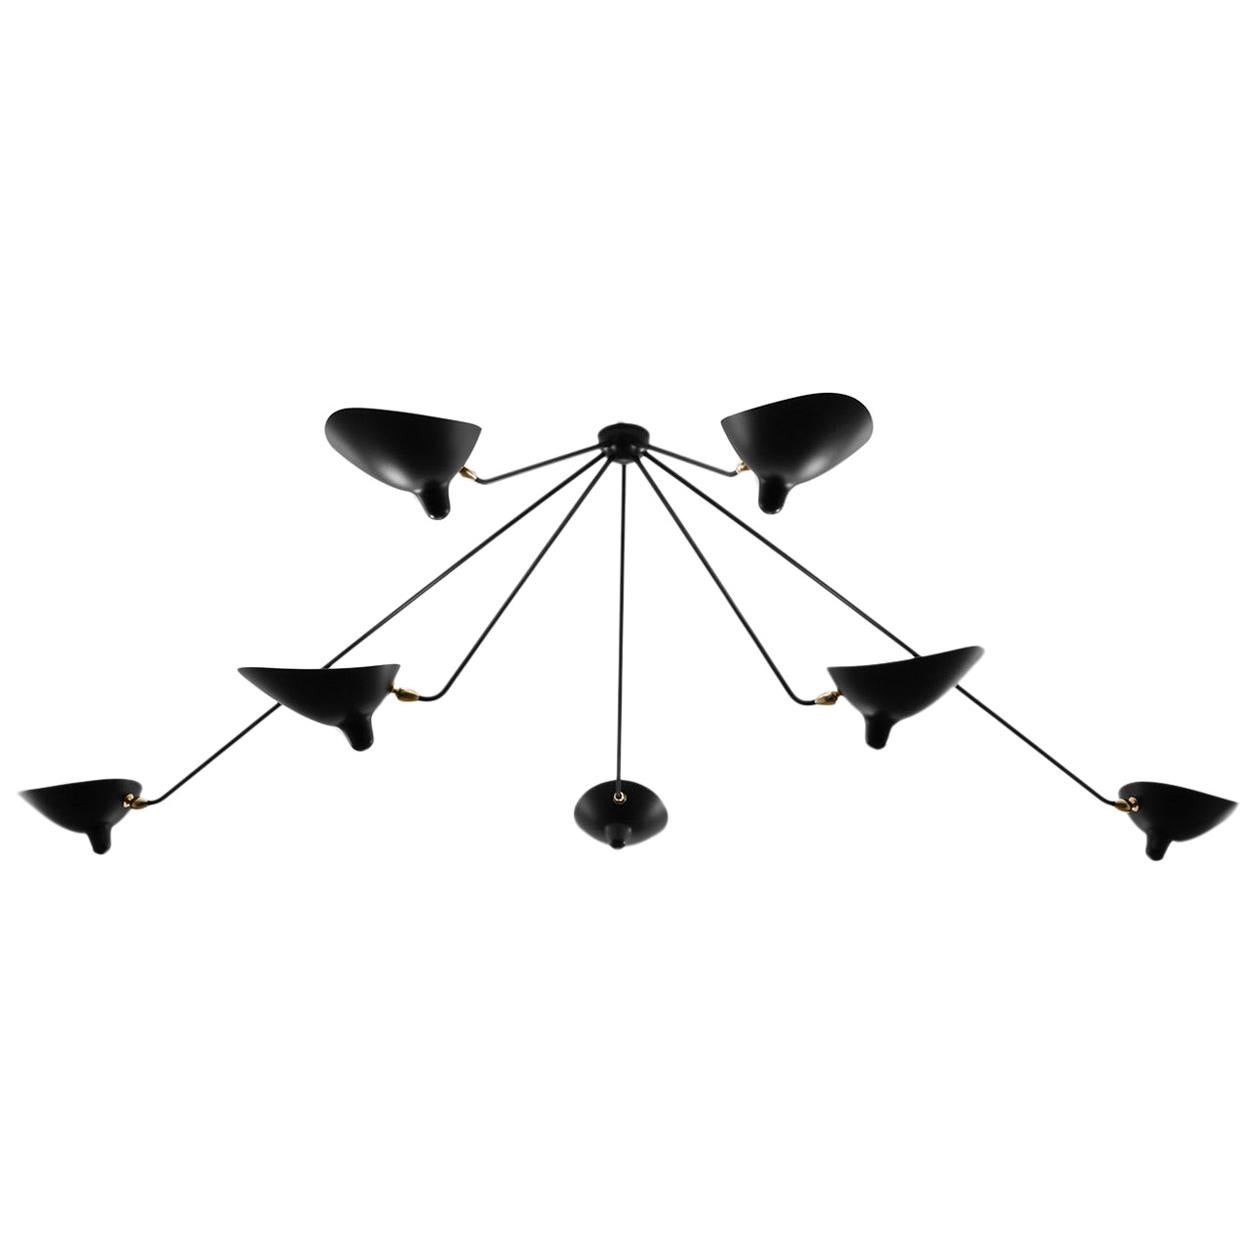 Serge Mouille Mid-Century Modern Black Seven Fixed Arms Spider Ceiling Lamp For Sale